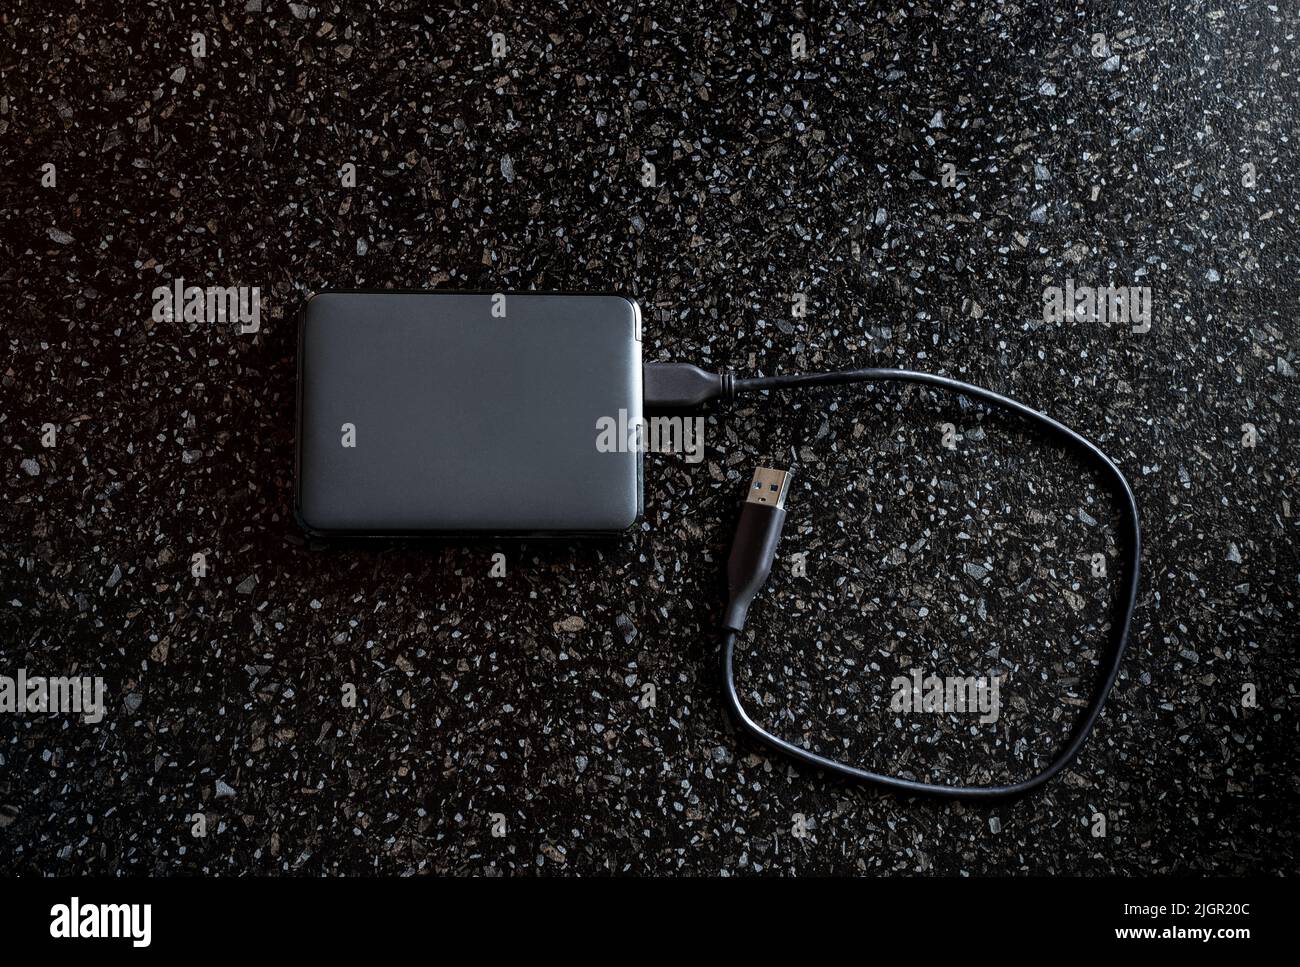 External hard drive in a black case with a wire on a black background. Useful portable storage device, high speed portable device. Stock Photo